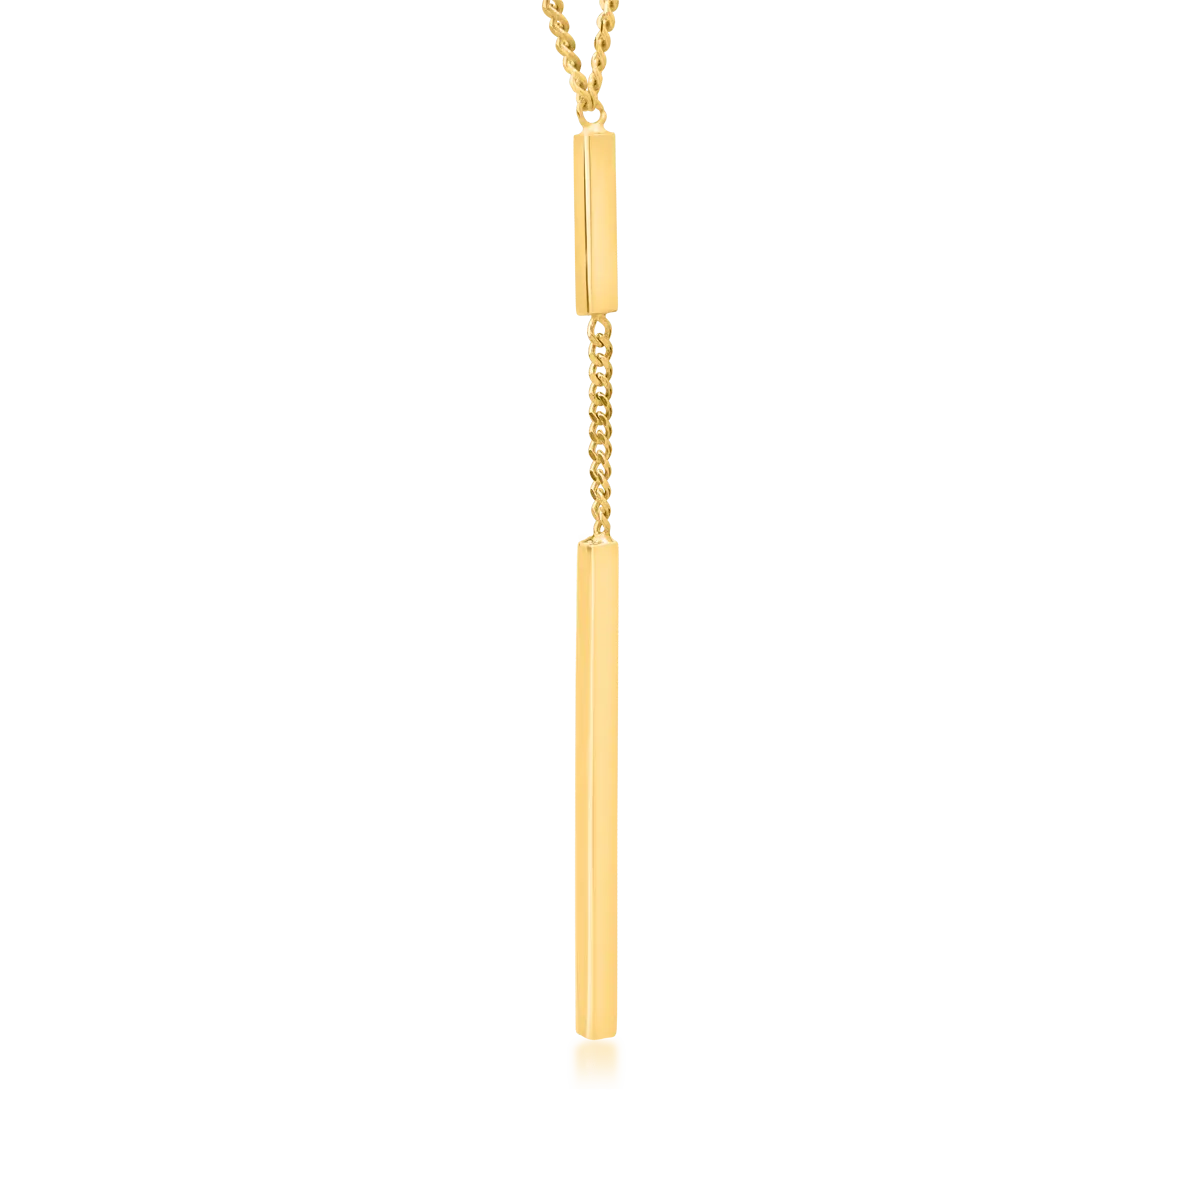 Yellow gold chain with geometric pendant